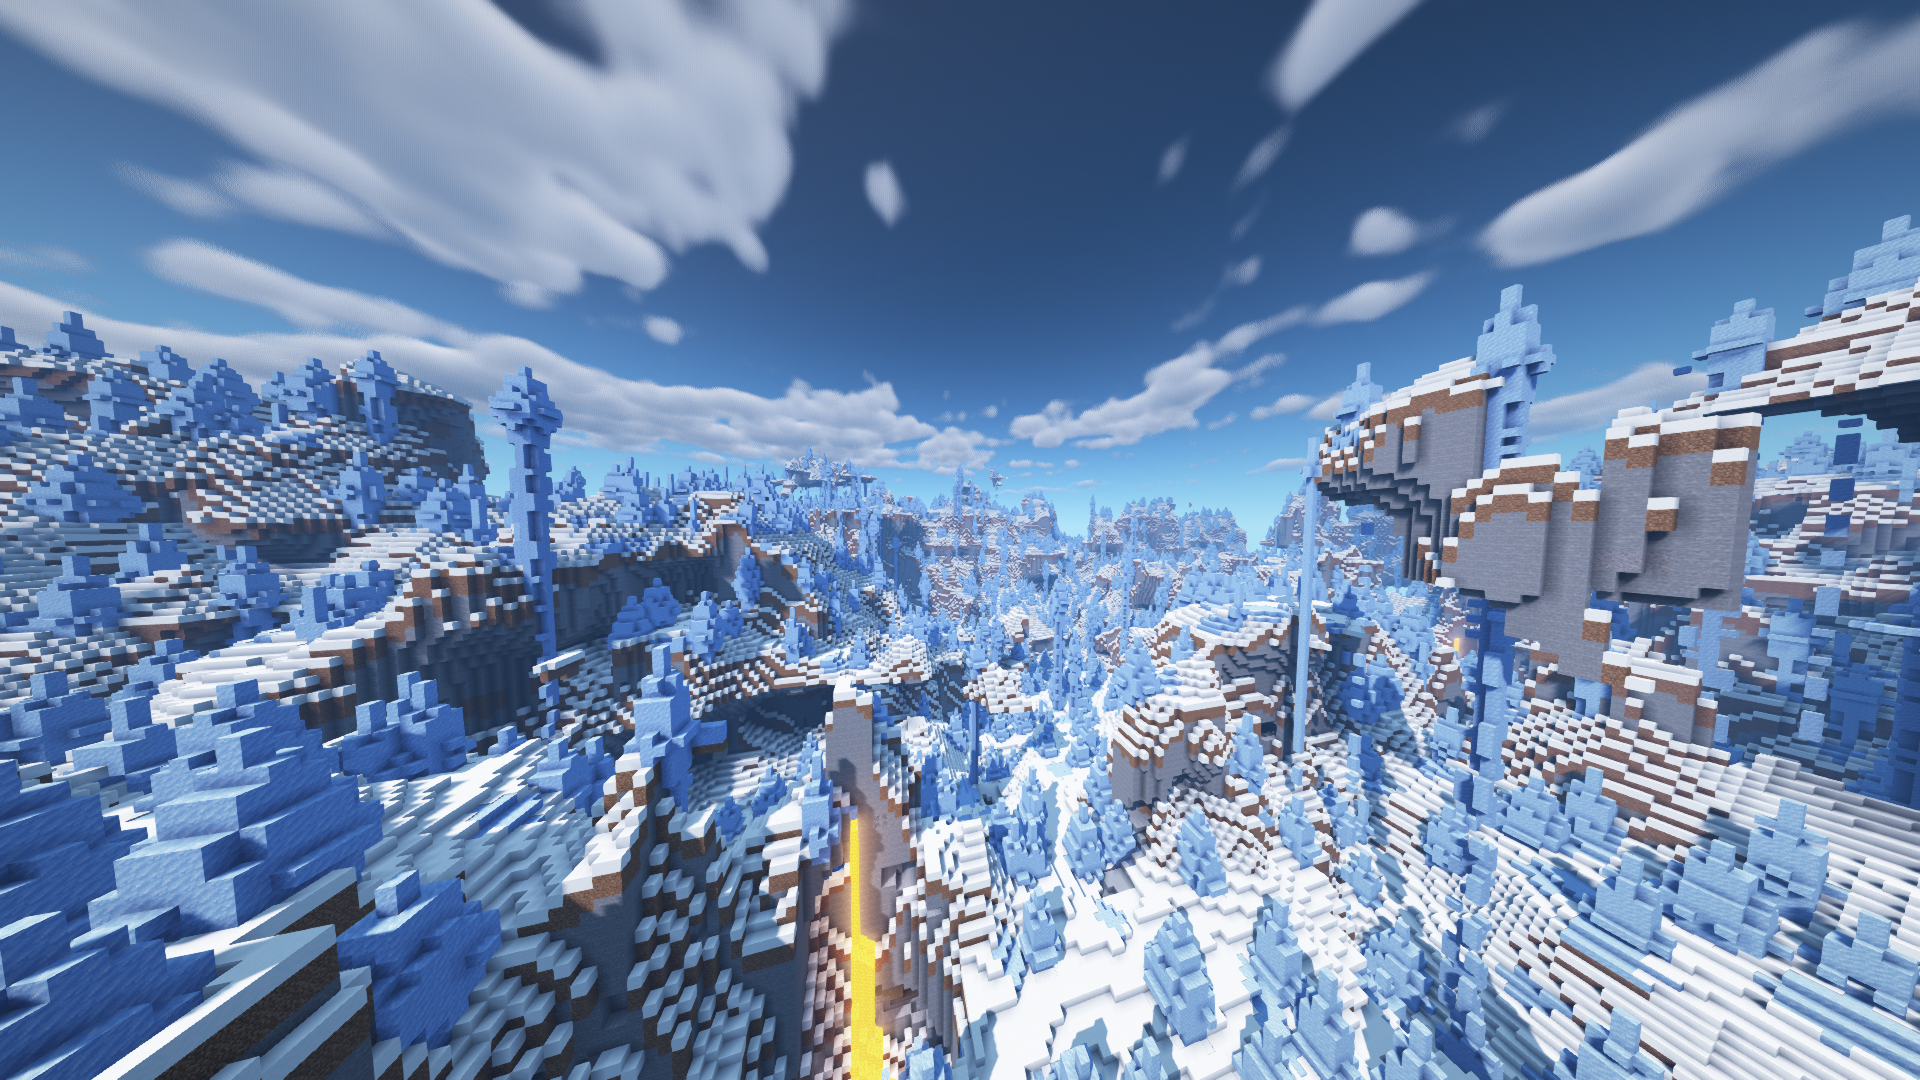 Amplified Ice Spikes Shaders